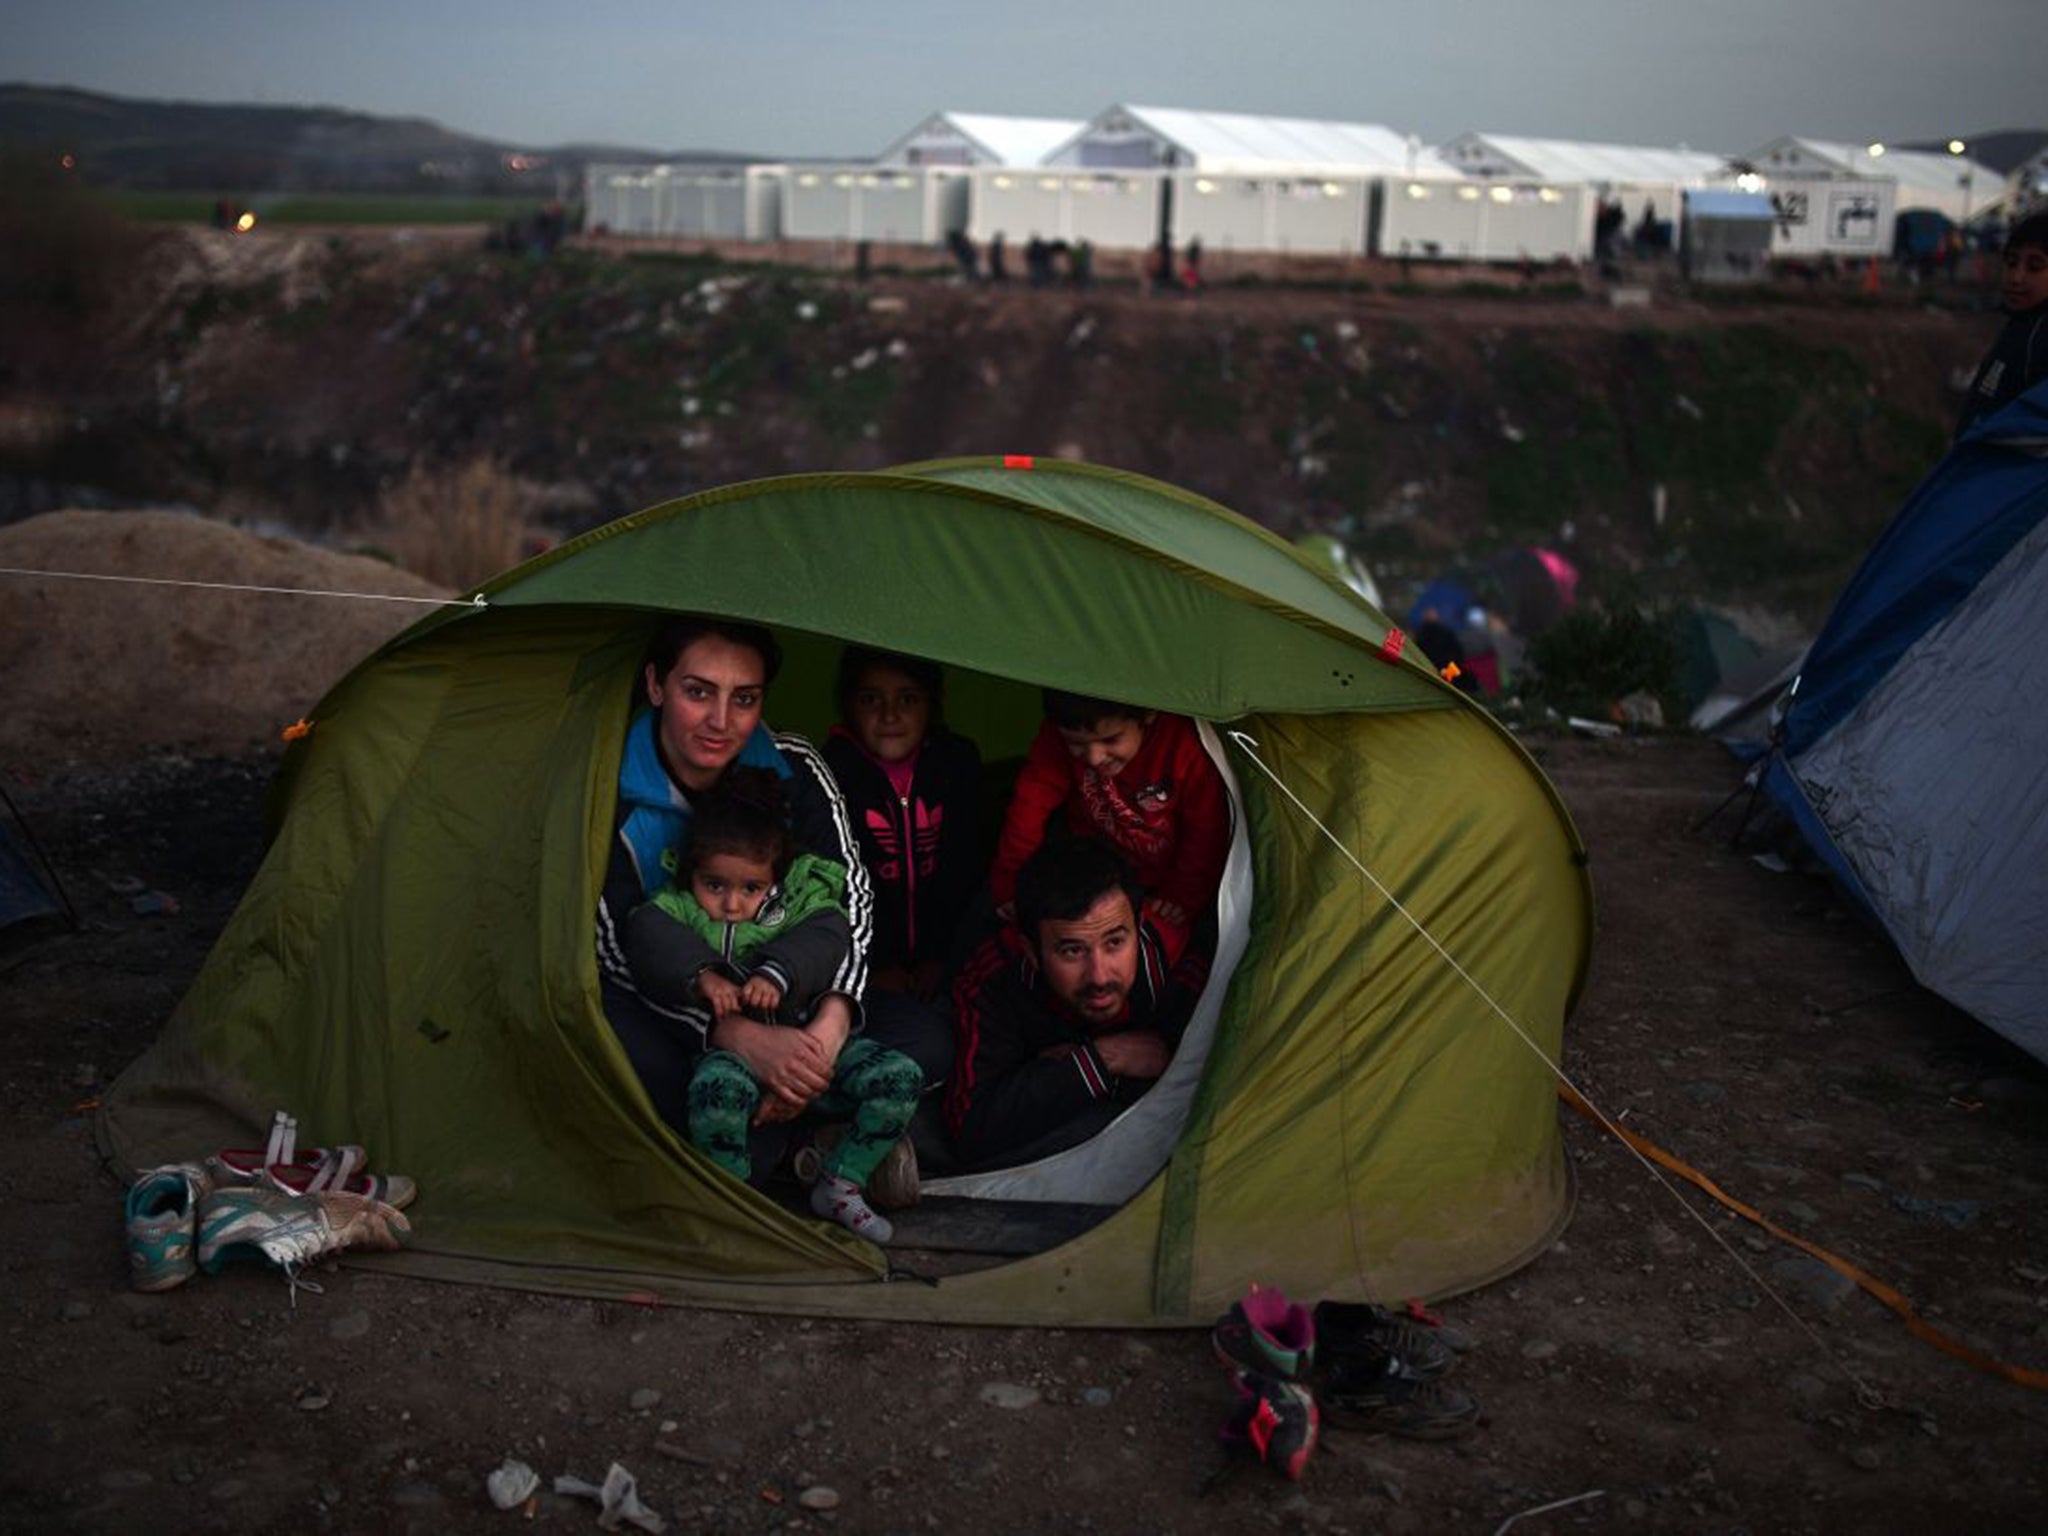 History will judge David Cameron on his part in the EU’s response to the refugee crisis